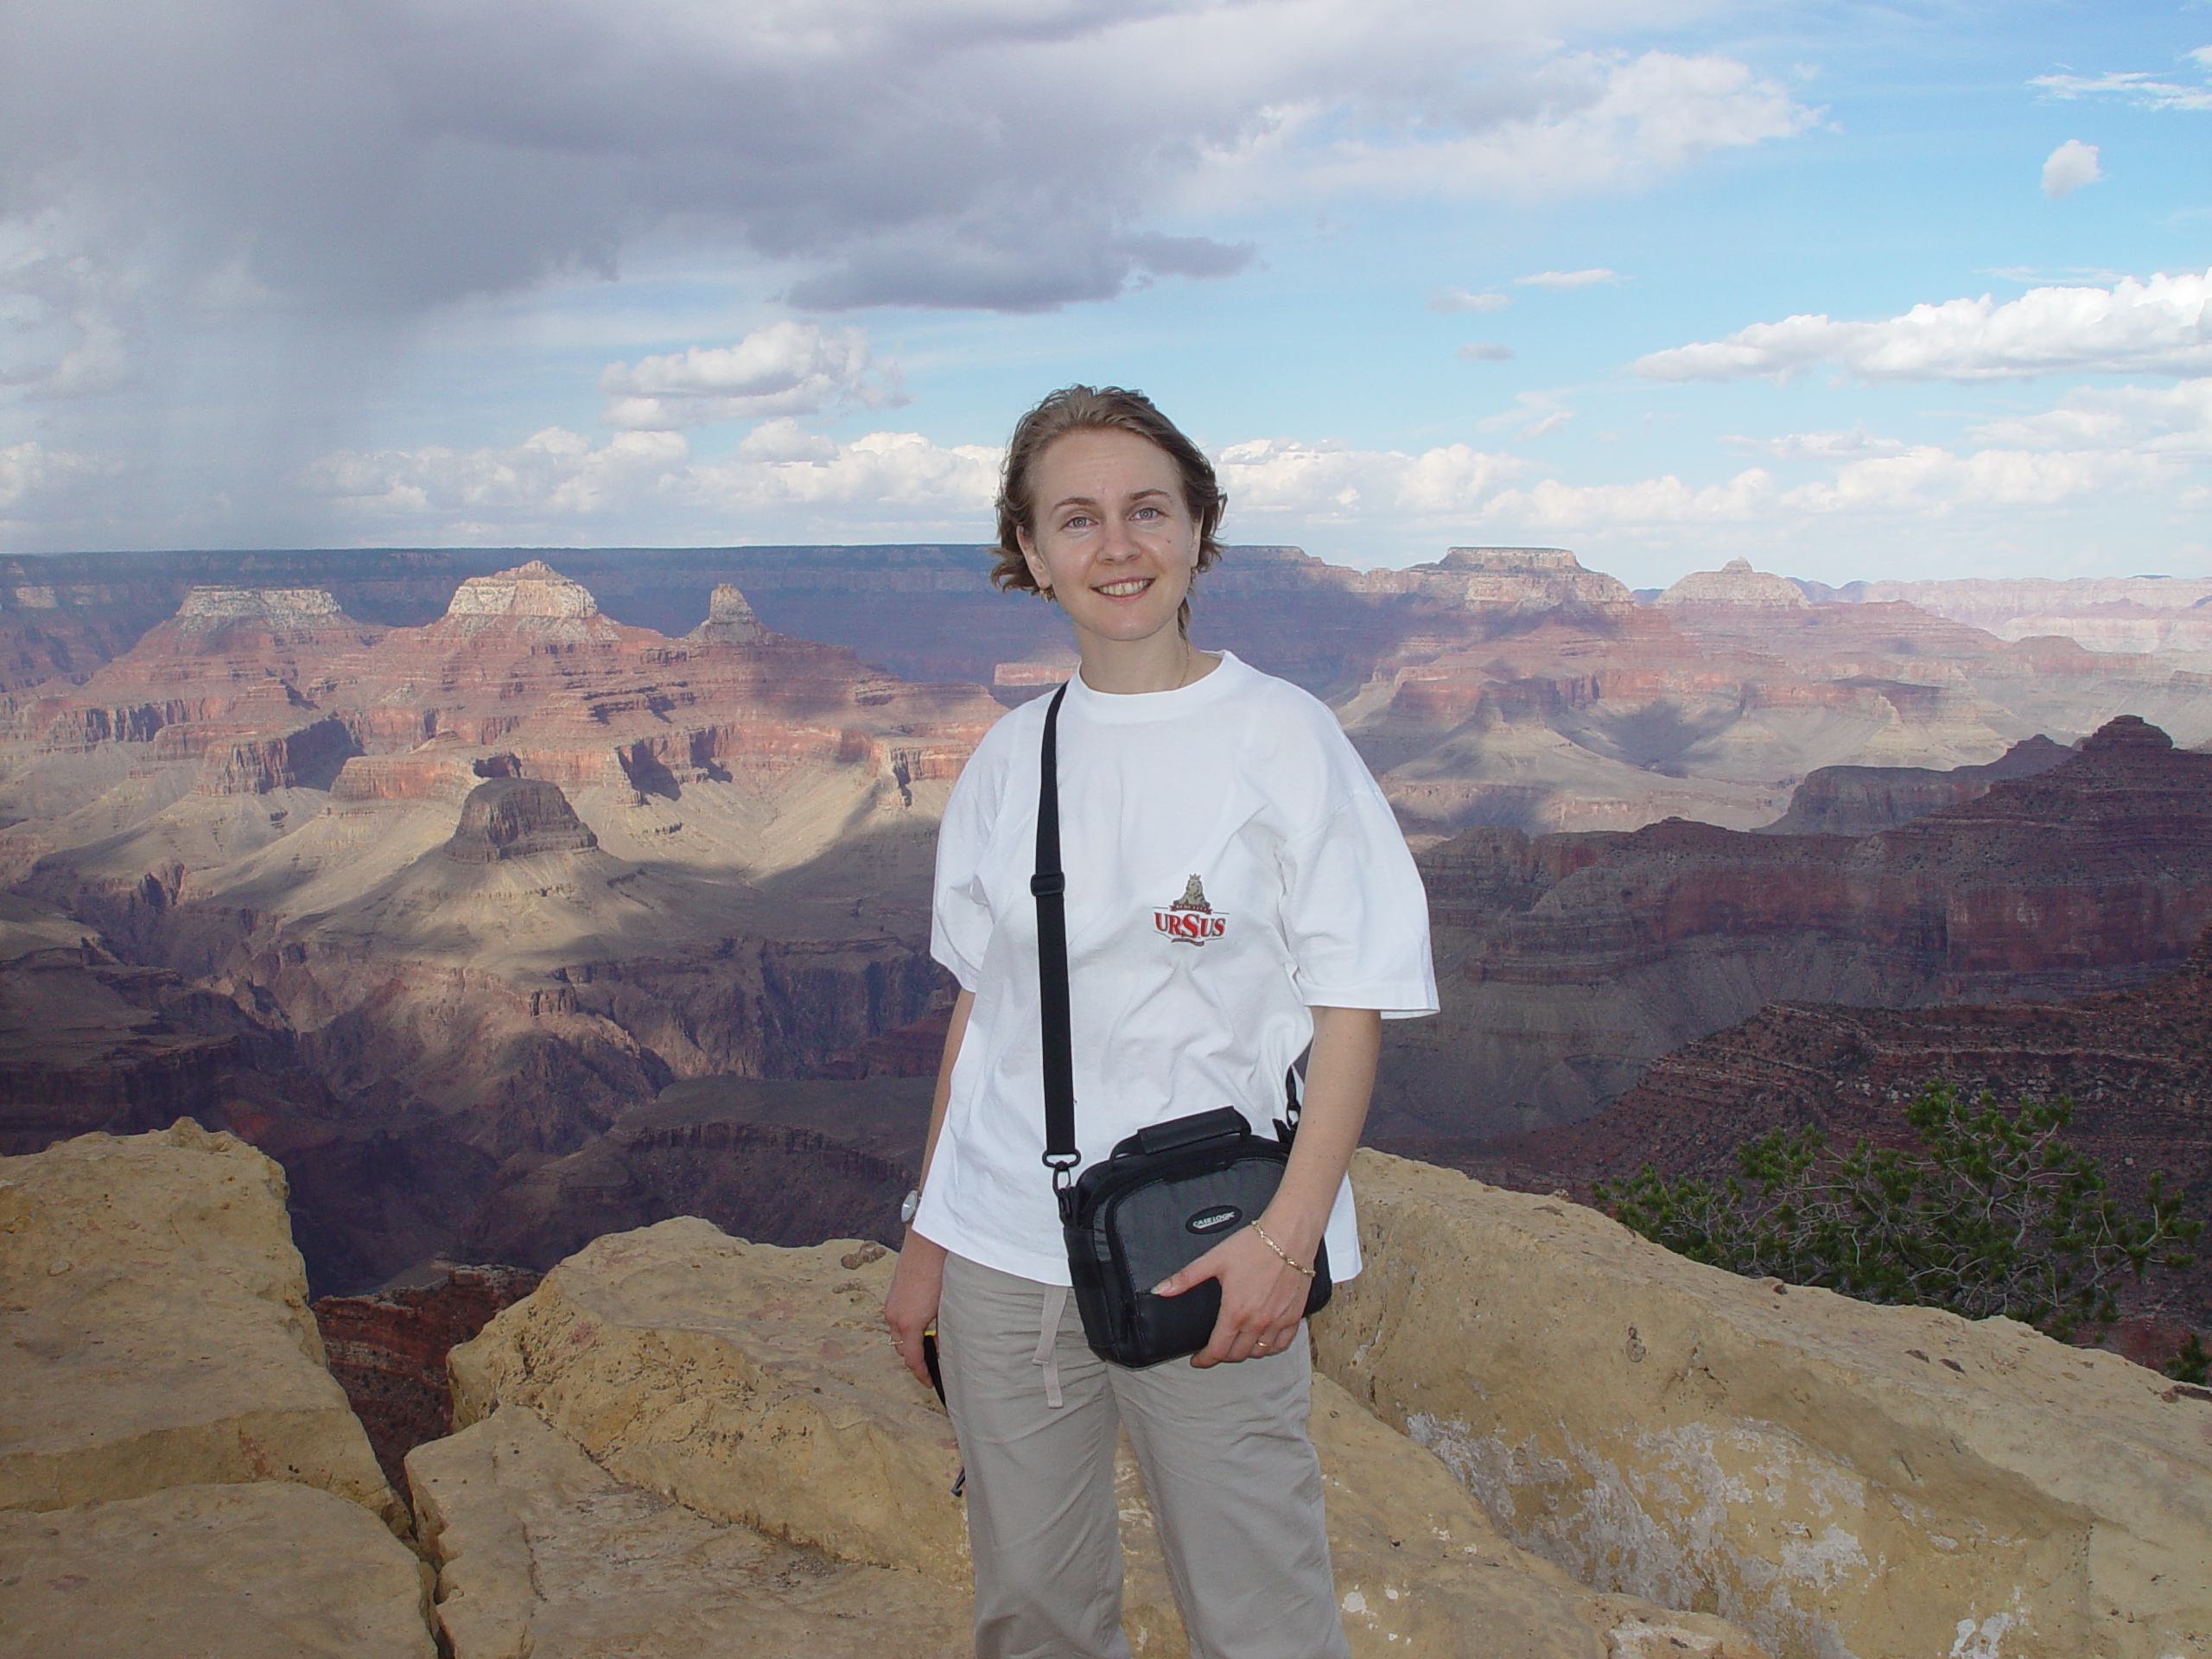 Oana visiting the Grand Canyon in July, 2002 shortly after arriving in the U.S.